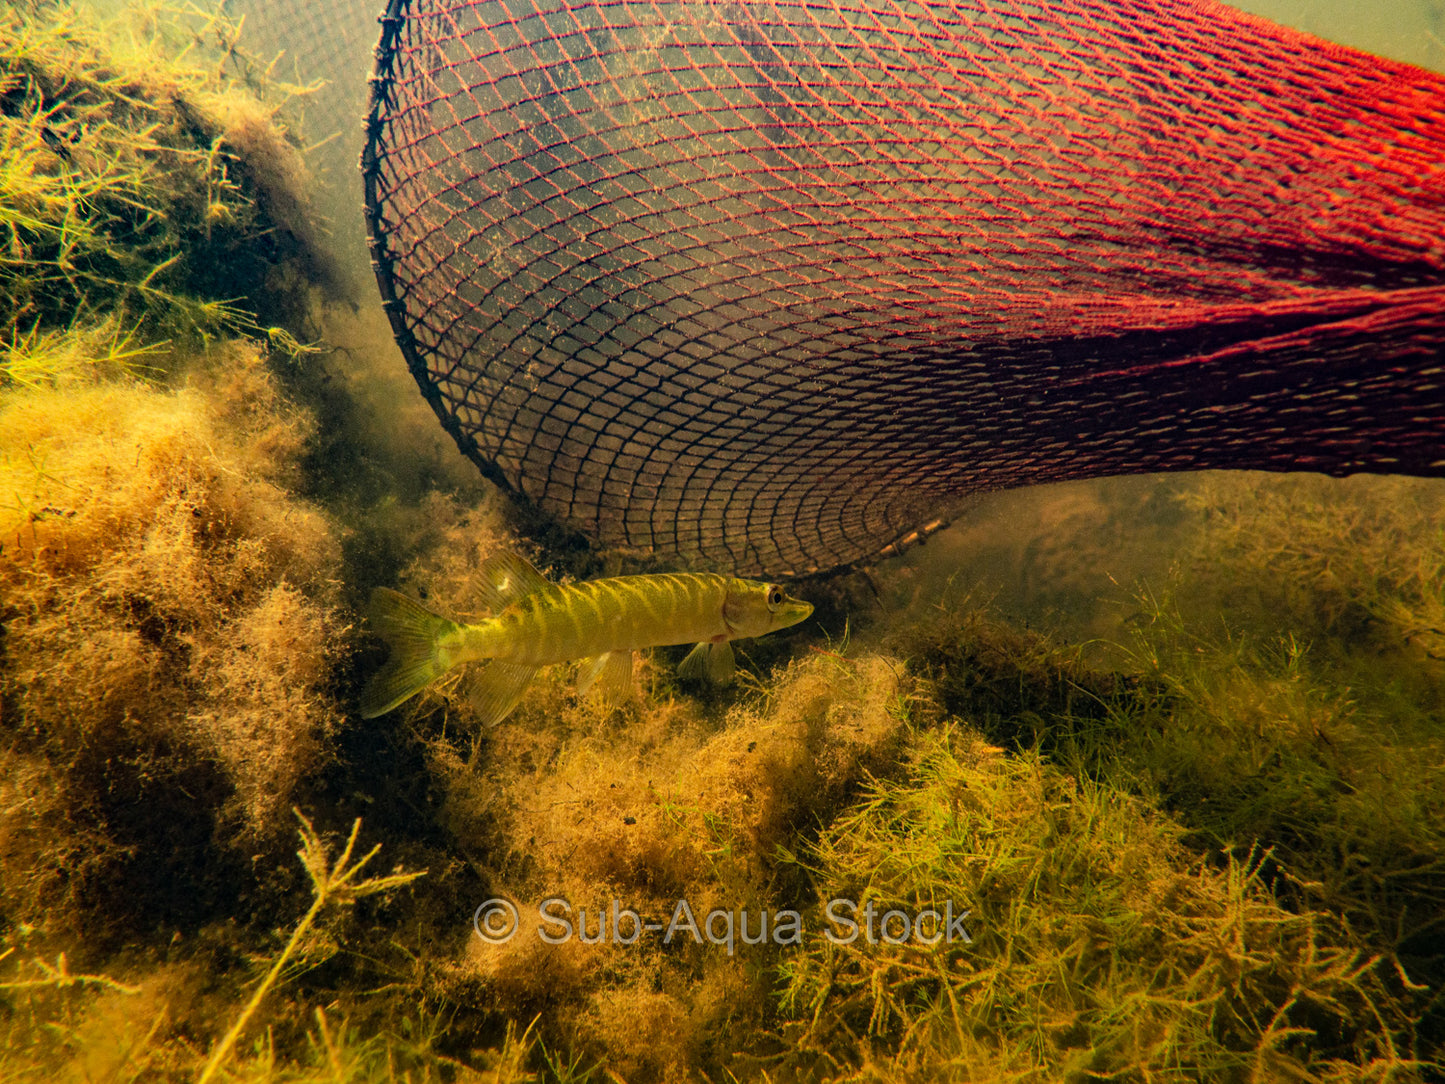 Juvenile northern pike (Esox lucius) outside of a fyke fishing net.